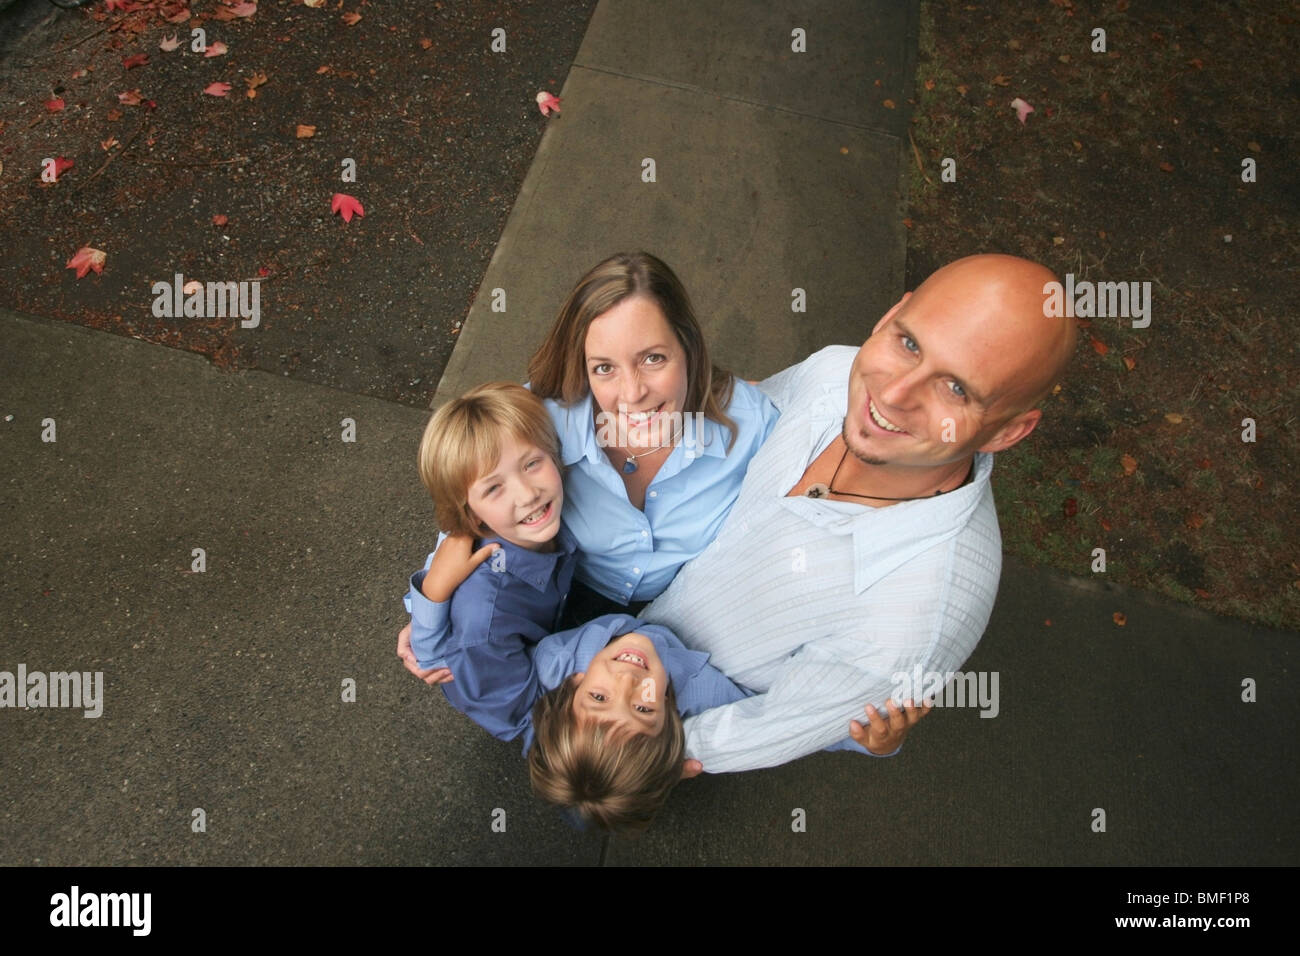 A Family Portrait Taken From A High Angle Stock Photo